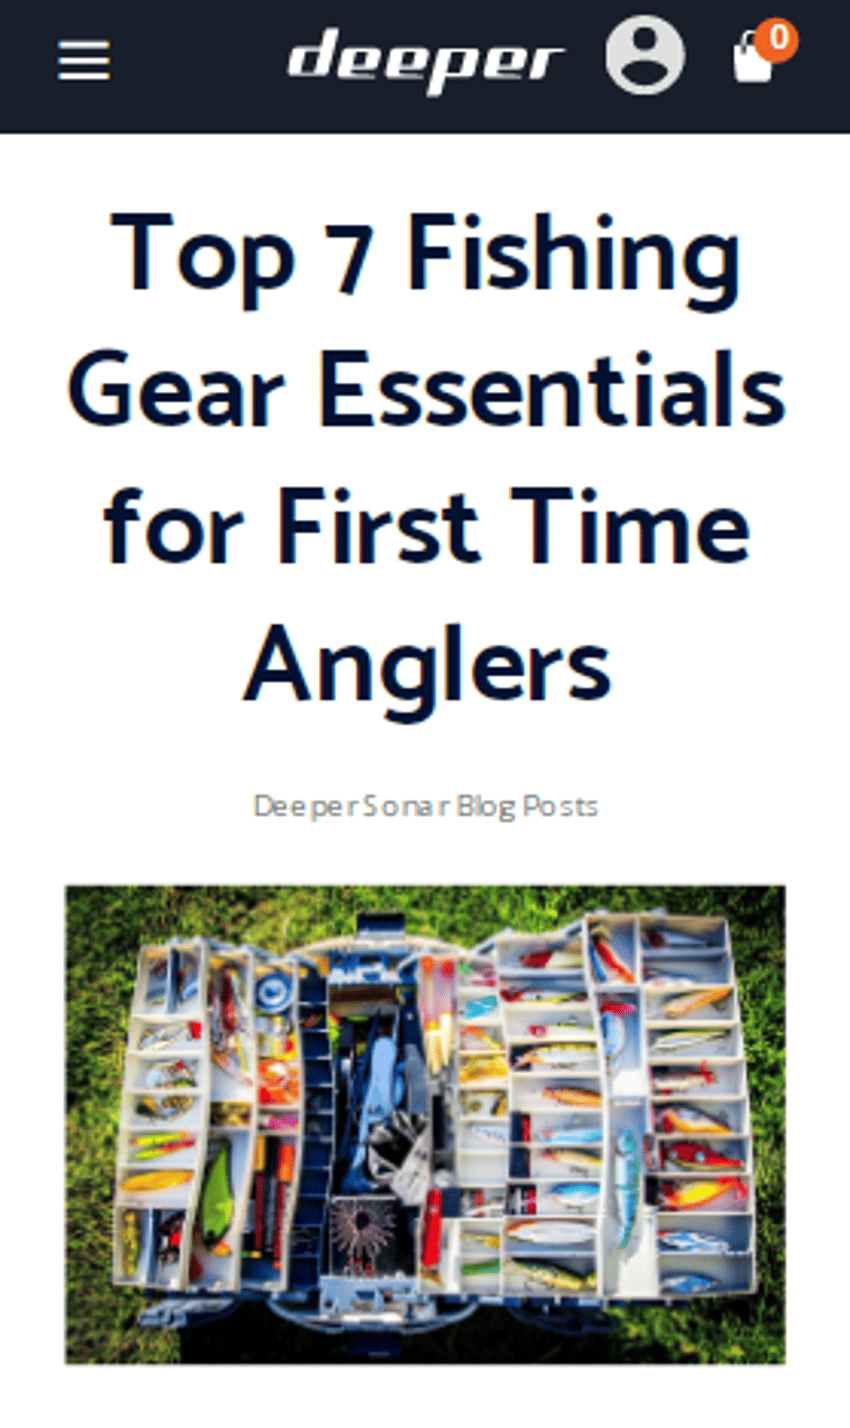 check out the full post [here](https://deepersonar.com/us/en_us/blog/top-7-fishing-gear-essentials-first-time-anglers)